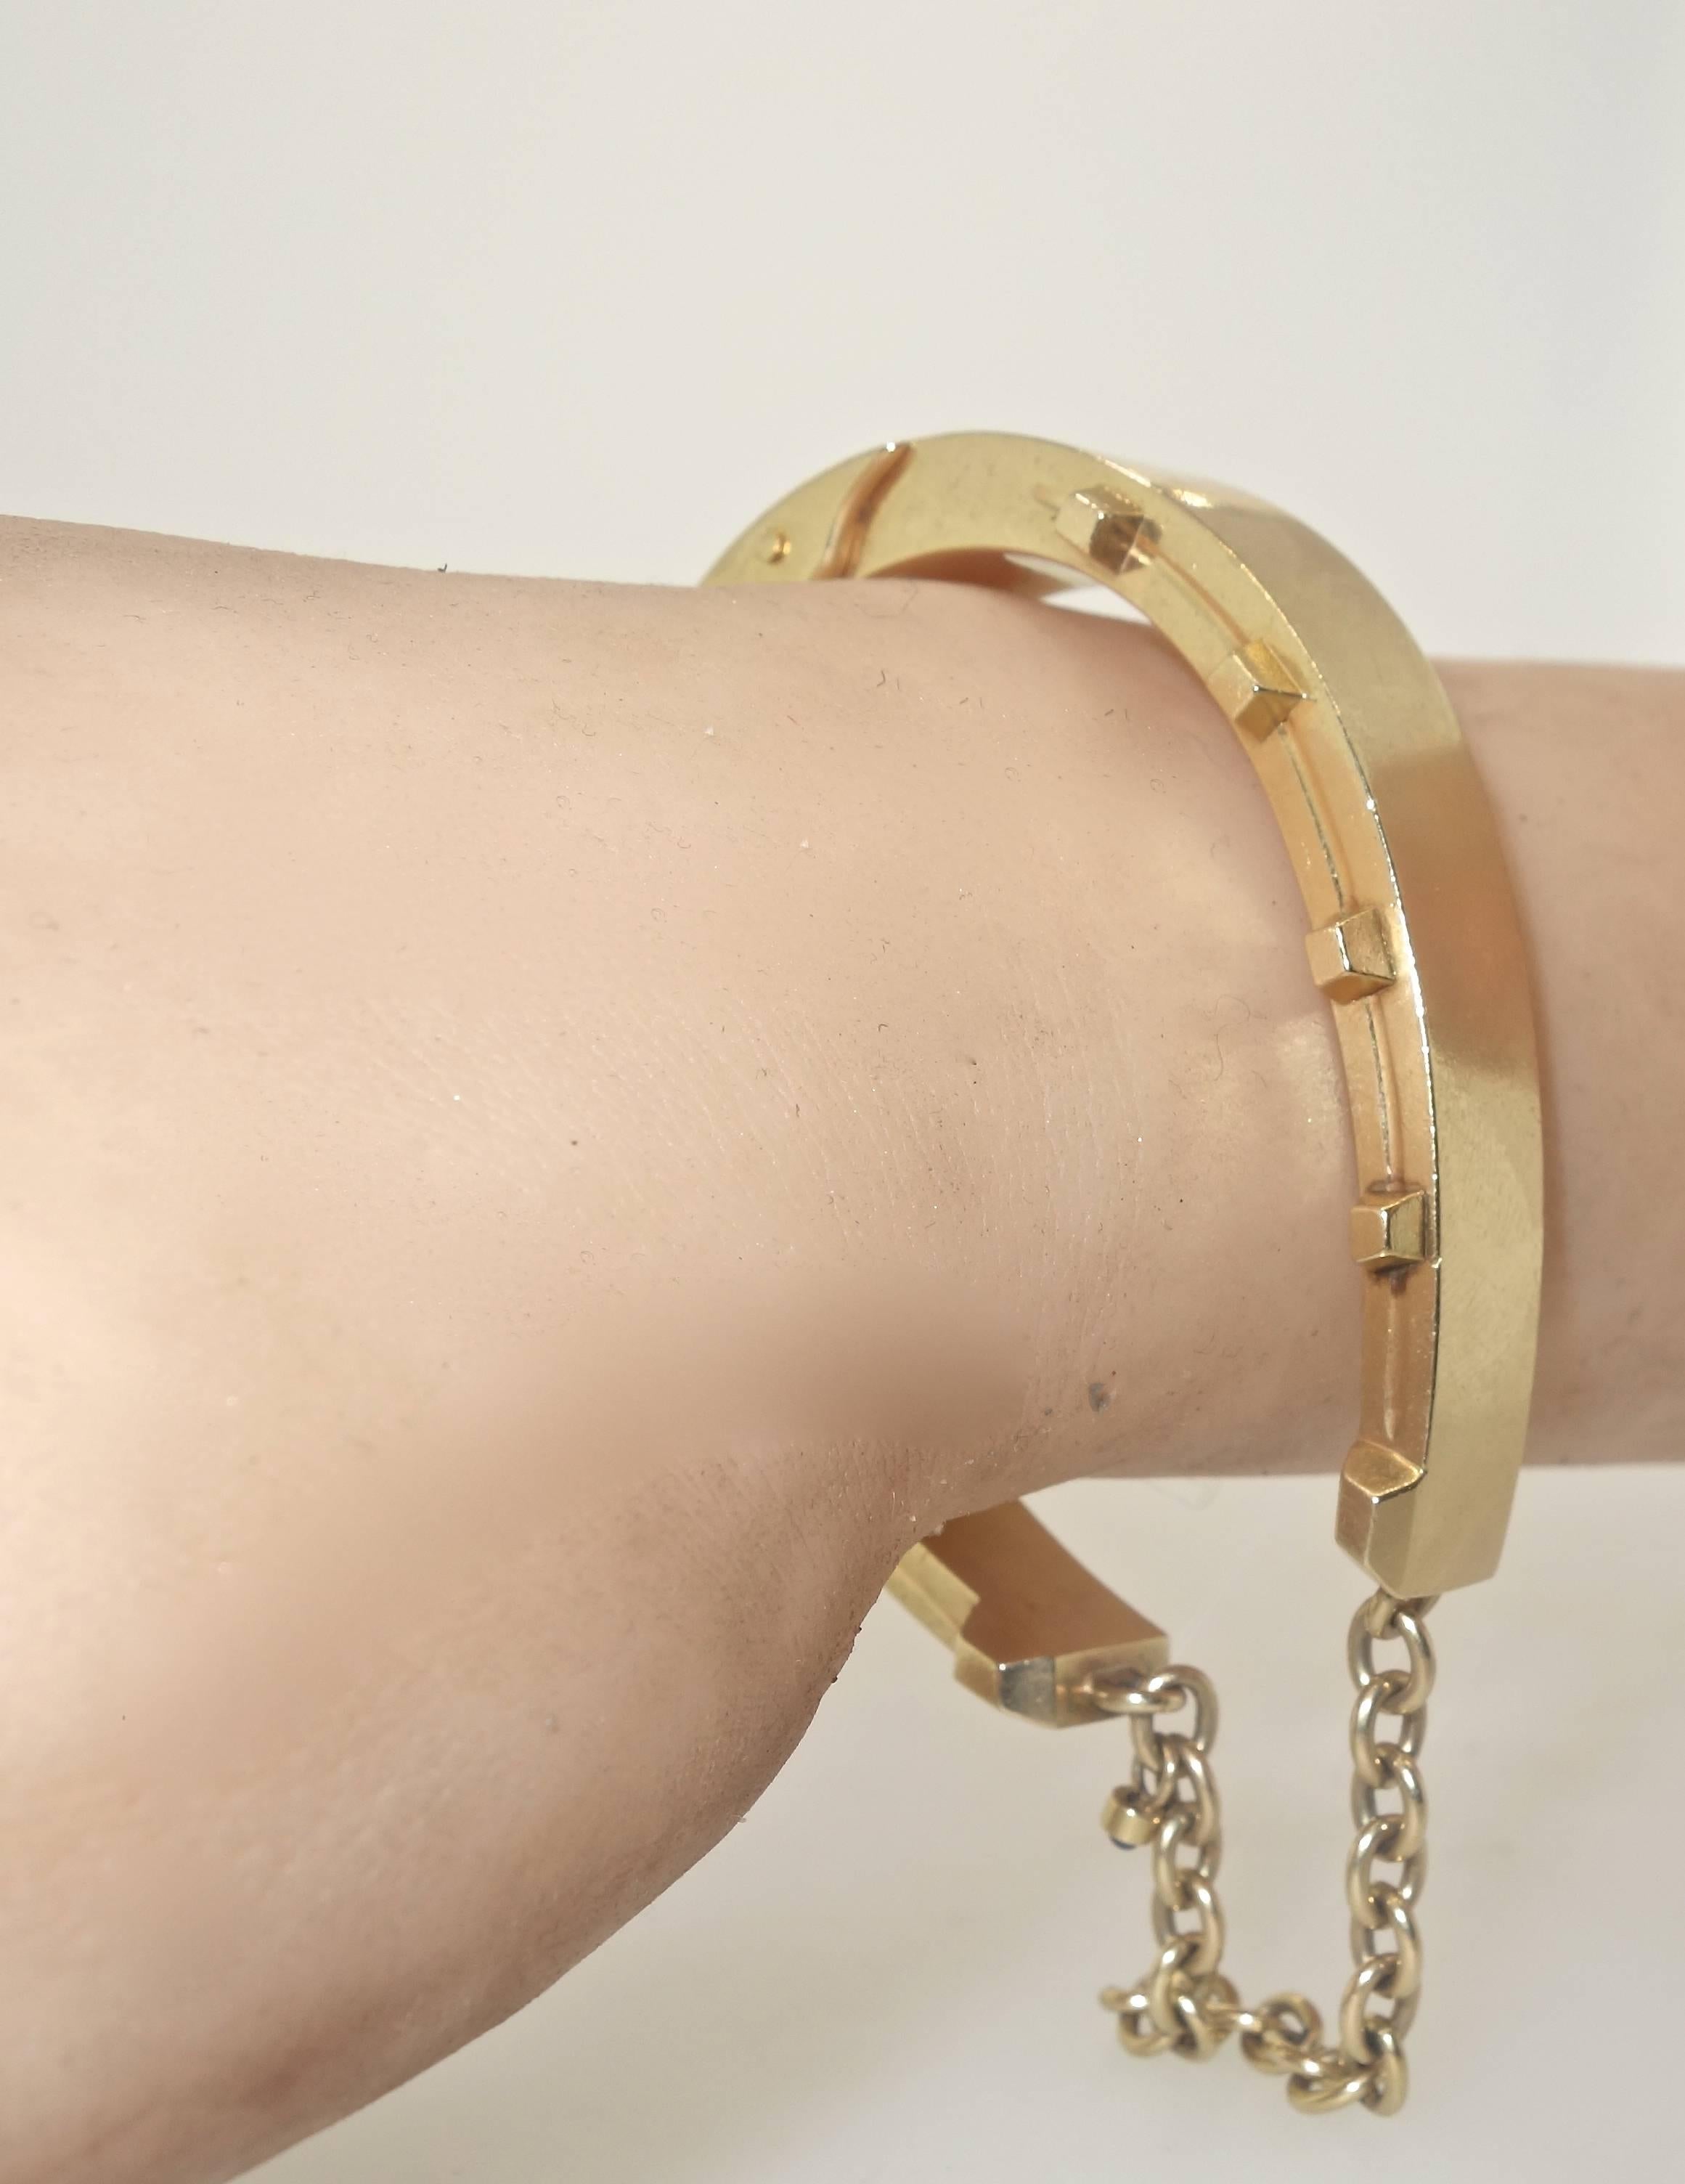 Unusual in design, this gold bangle bracelet opens up wide so that the wrist slips on with ease.  It is an unusual design as it appears as a bold gold bracelet, but the observer soon see that it is in fact the motif of a classic horse shoe. 